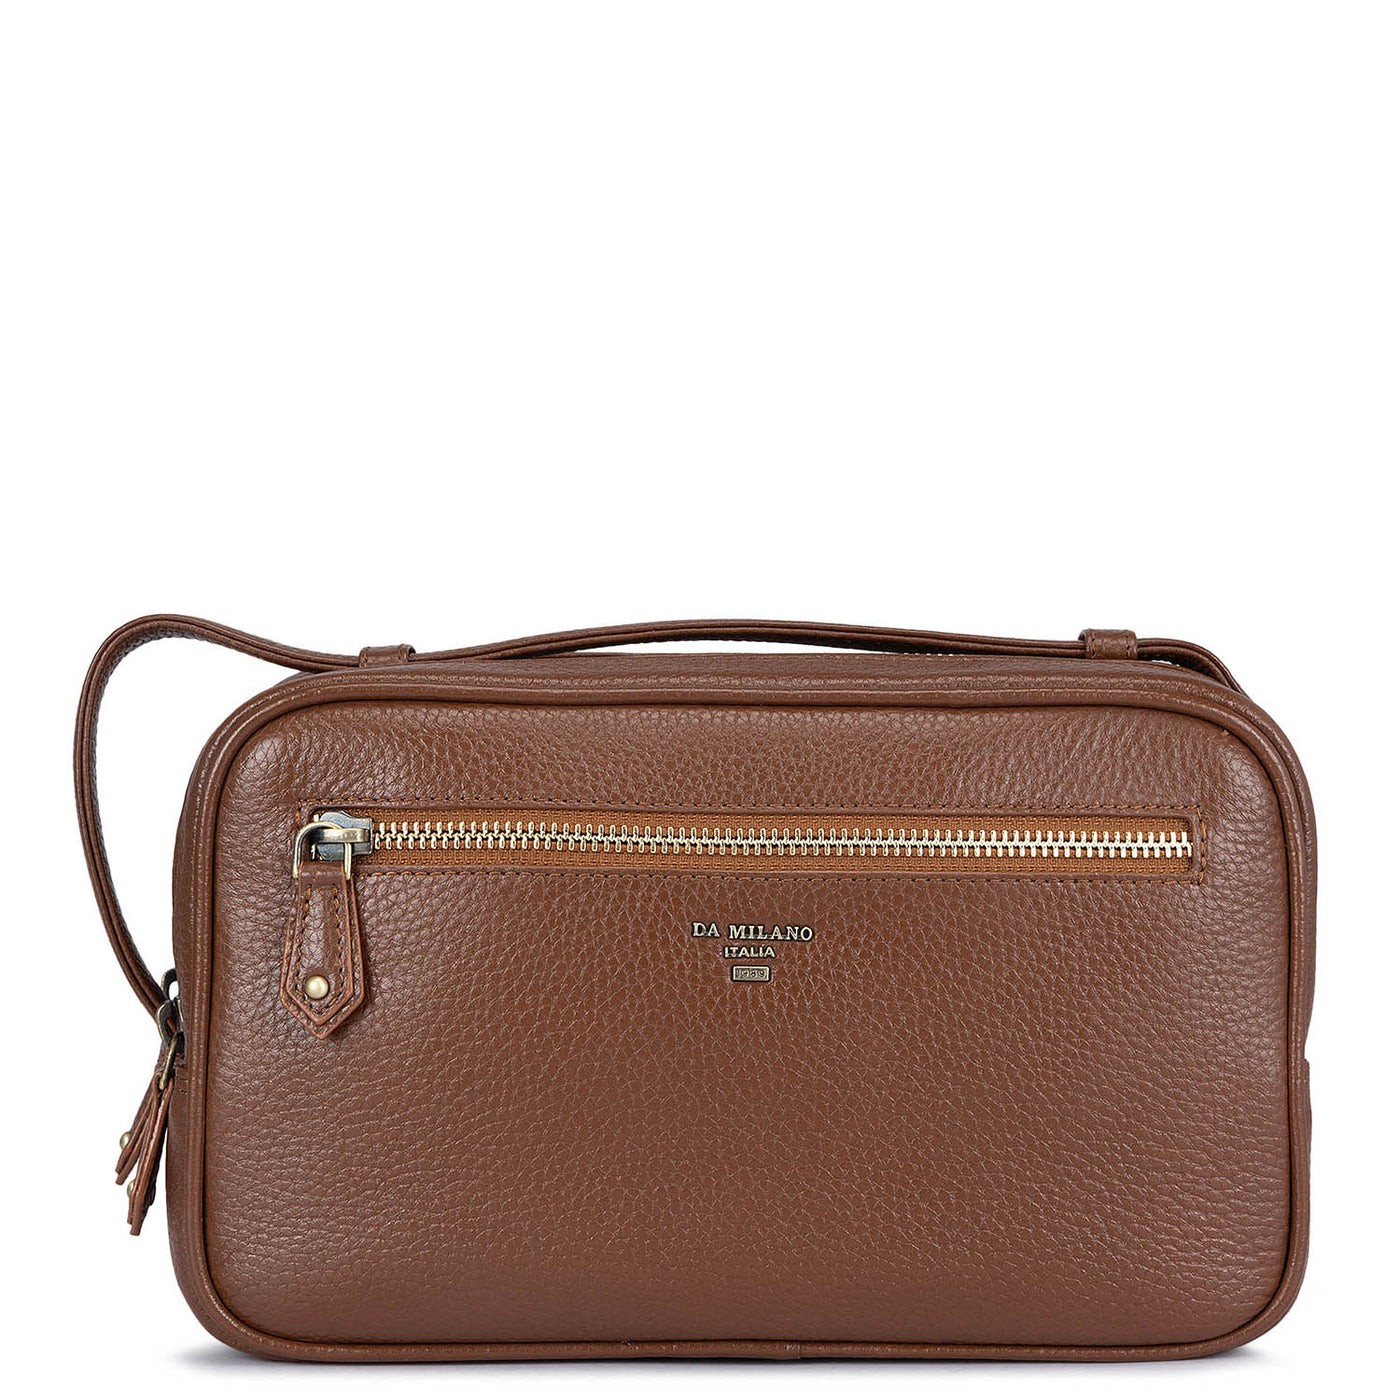 Wax Leather Vanity Pouch - Cognac